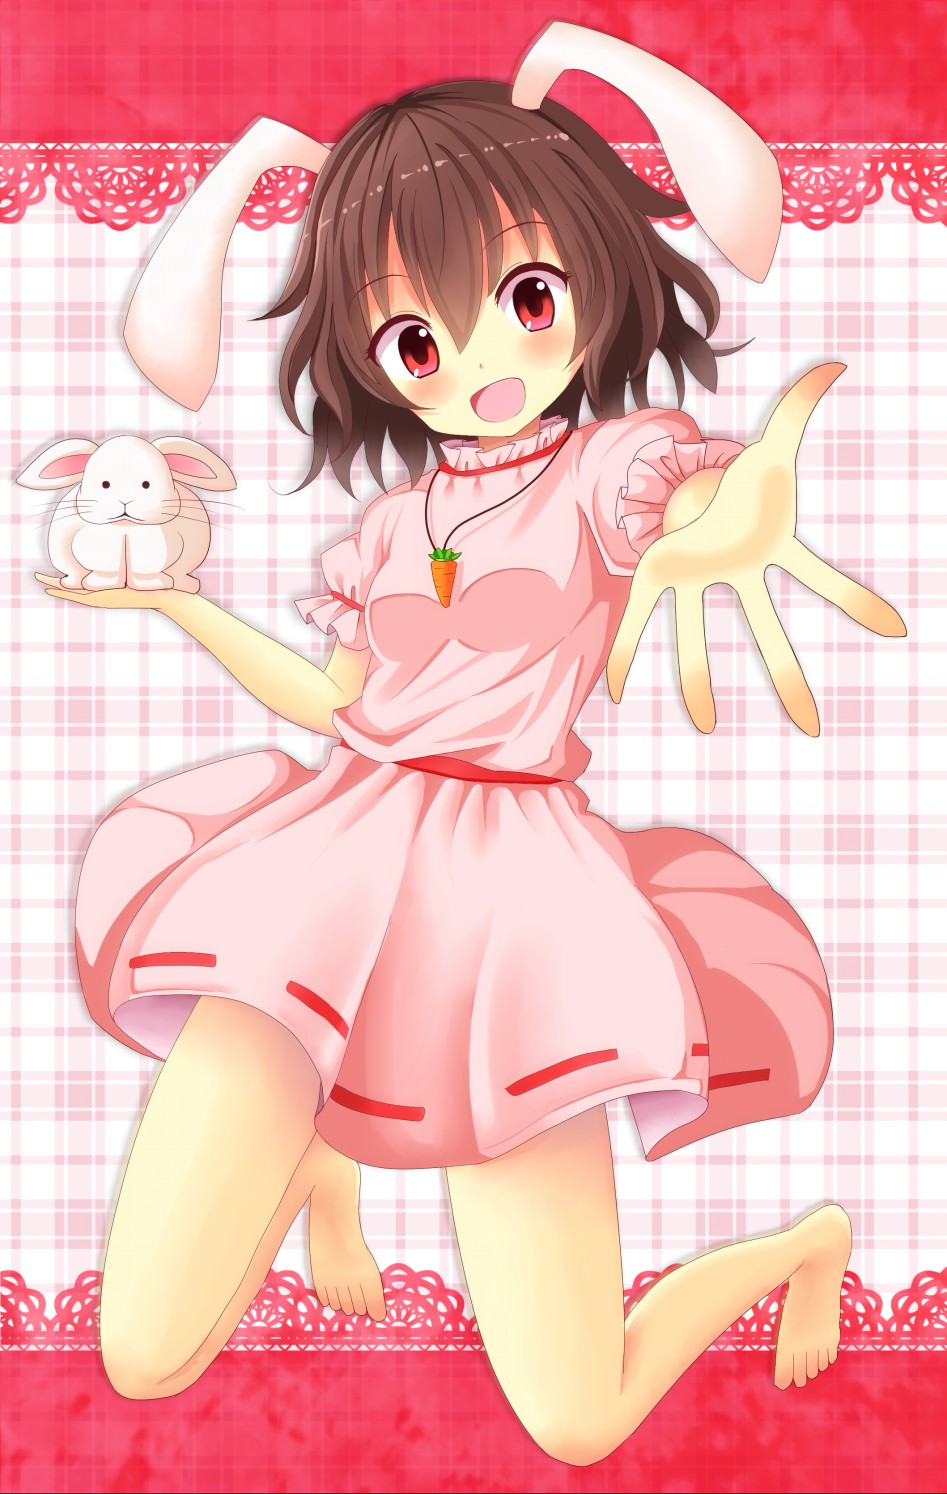 inaba tewi (touhou) drawn by akakabu (obsidian910) - 57bf06a458ea06b9ee4cb9cdc4fabe30.png